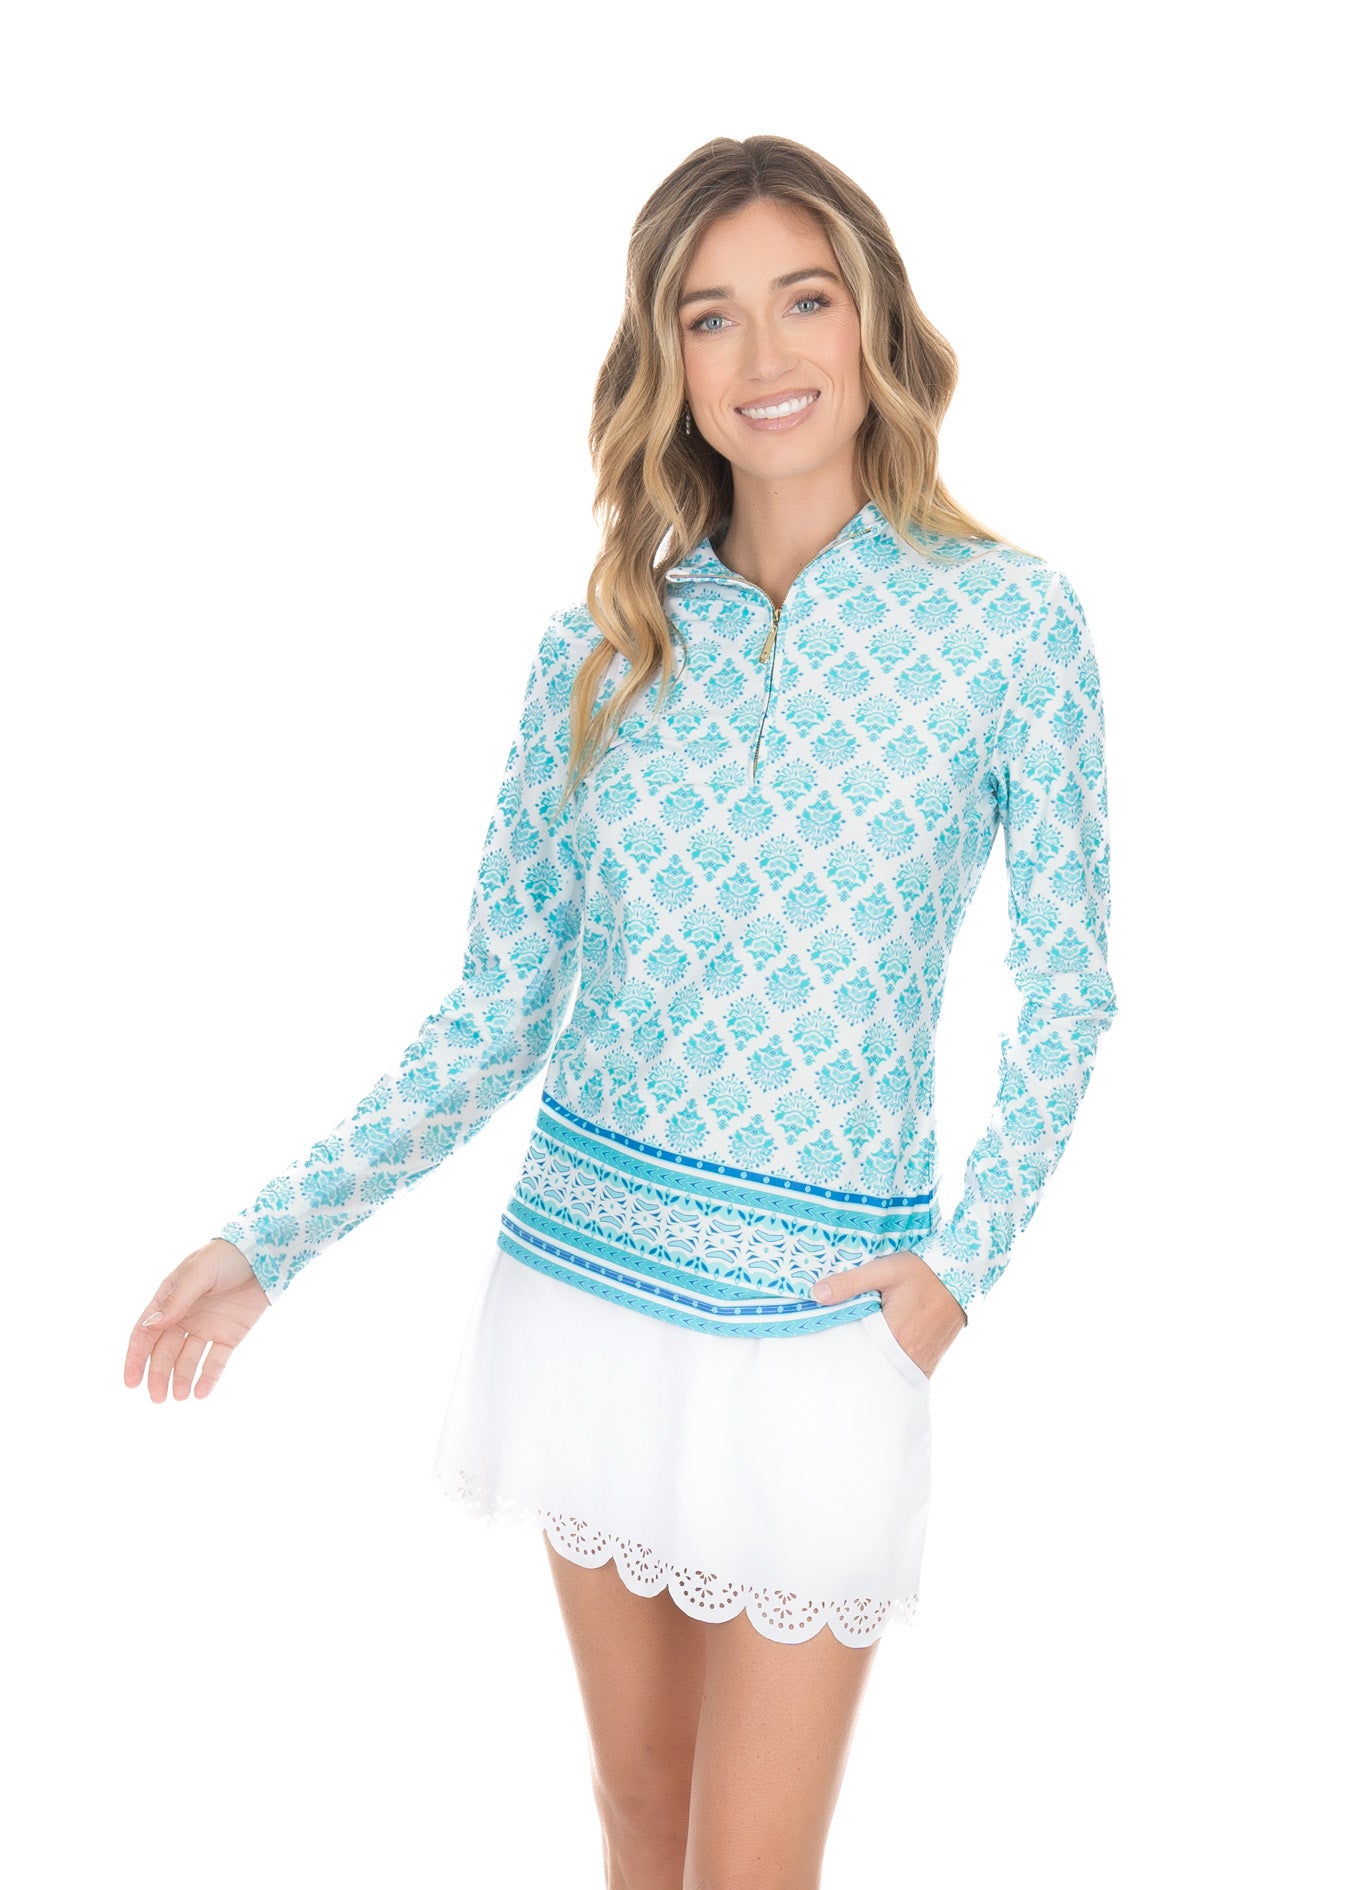 Blonde woman wearing Amalfi Coast 1/4 Zip Sport Top with white scalloped skort in front of a white background.